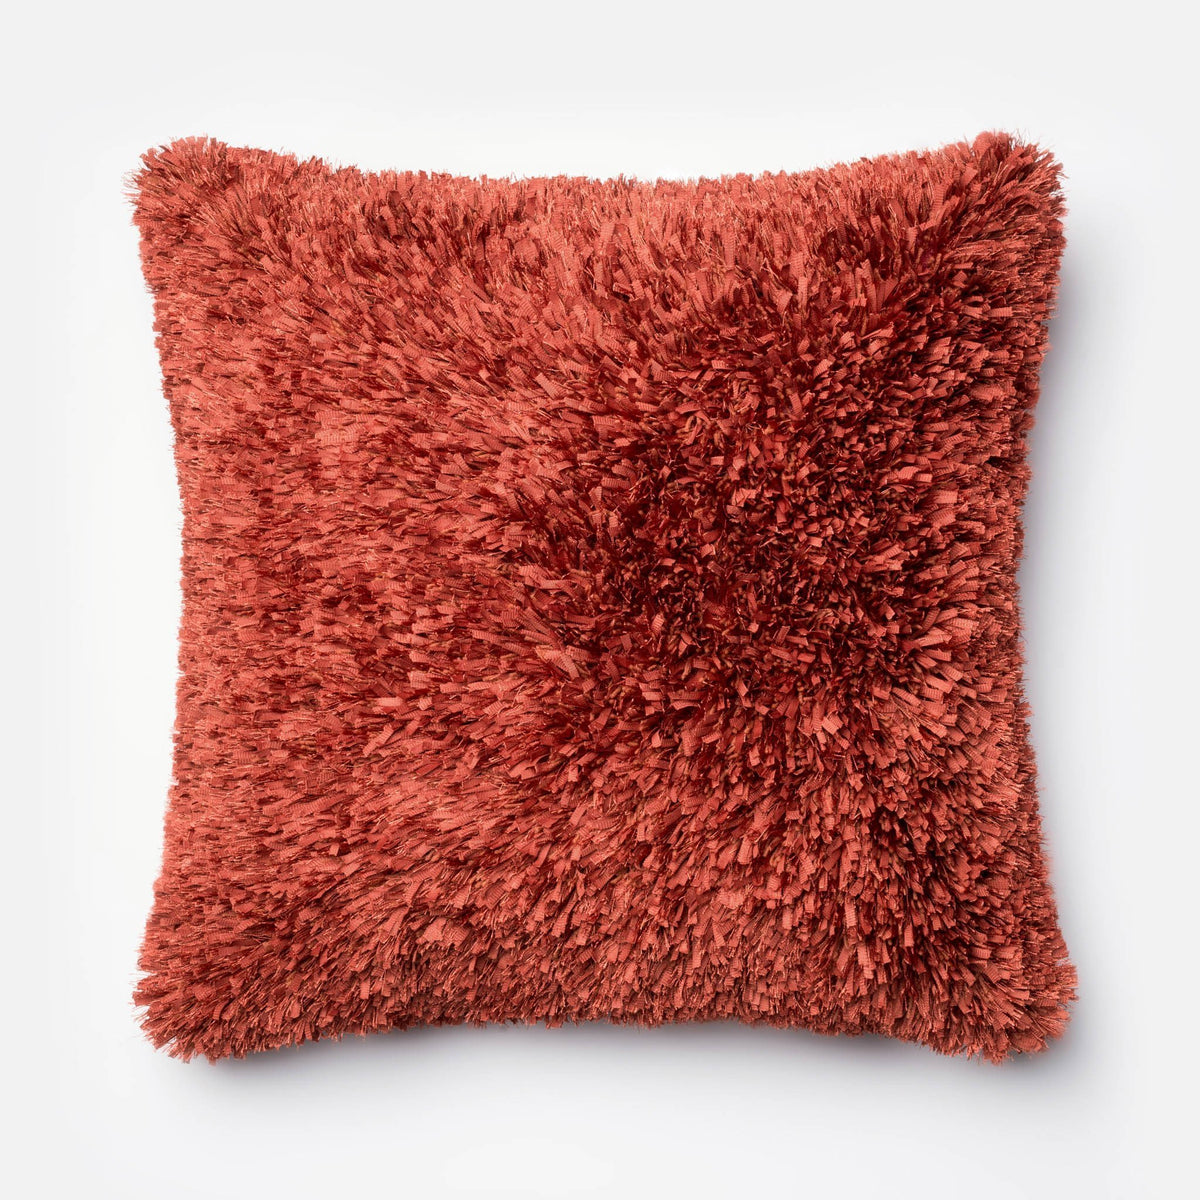 Rust Square P0045 Pillow - Rug & Home